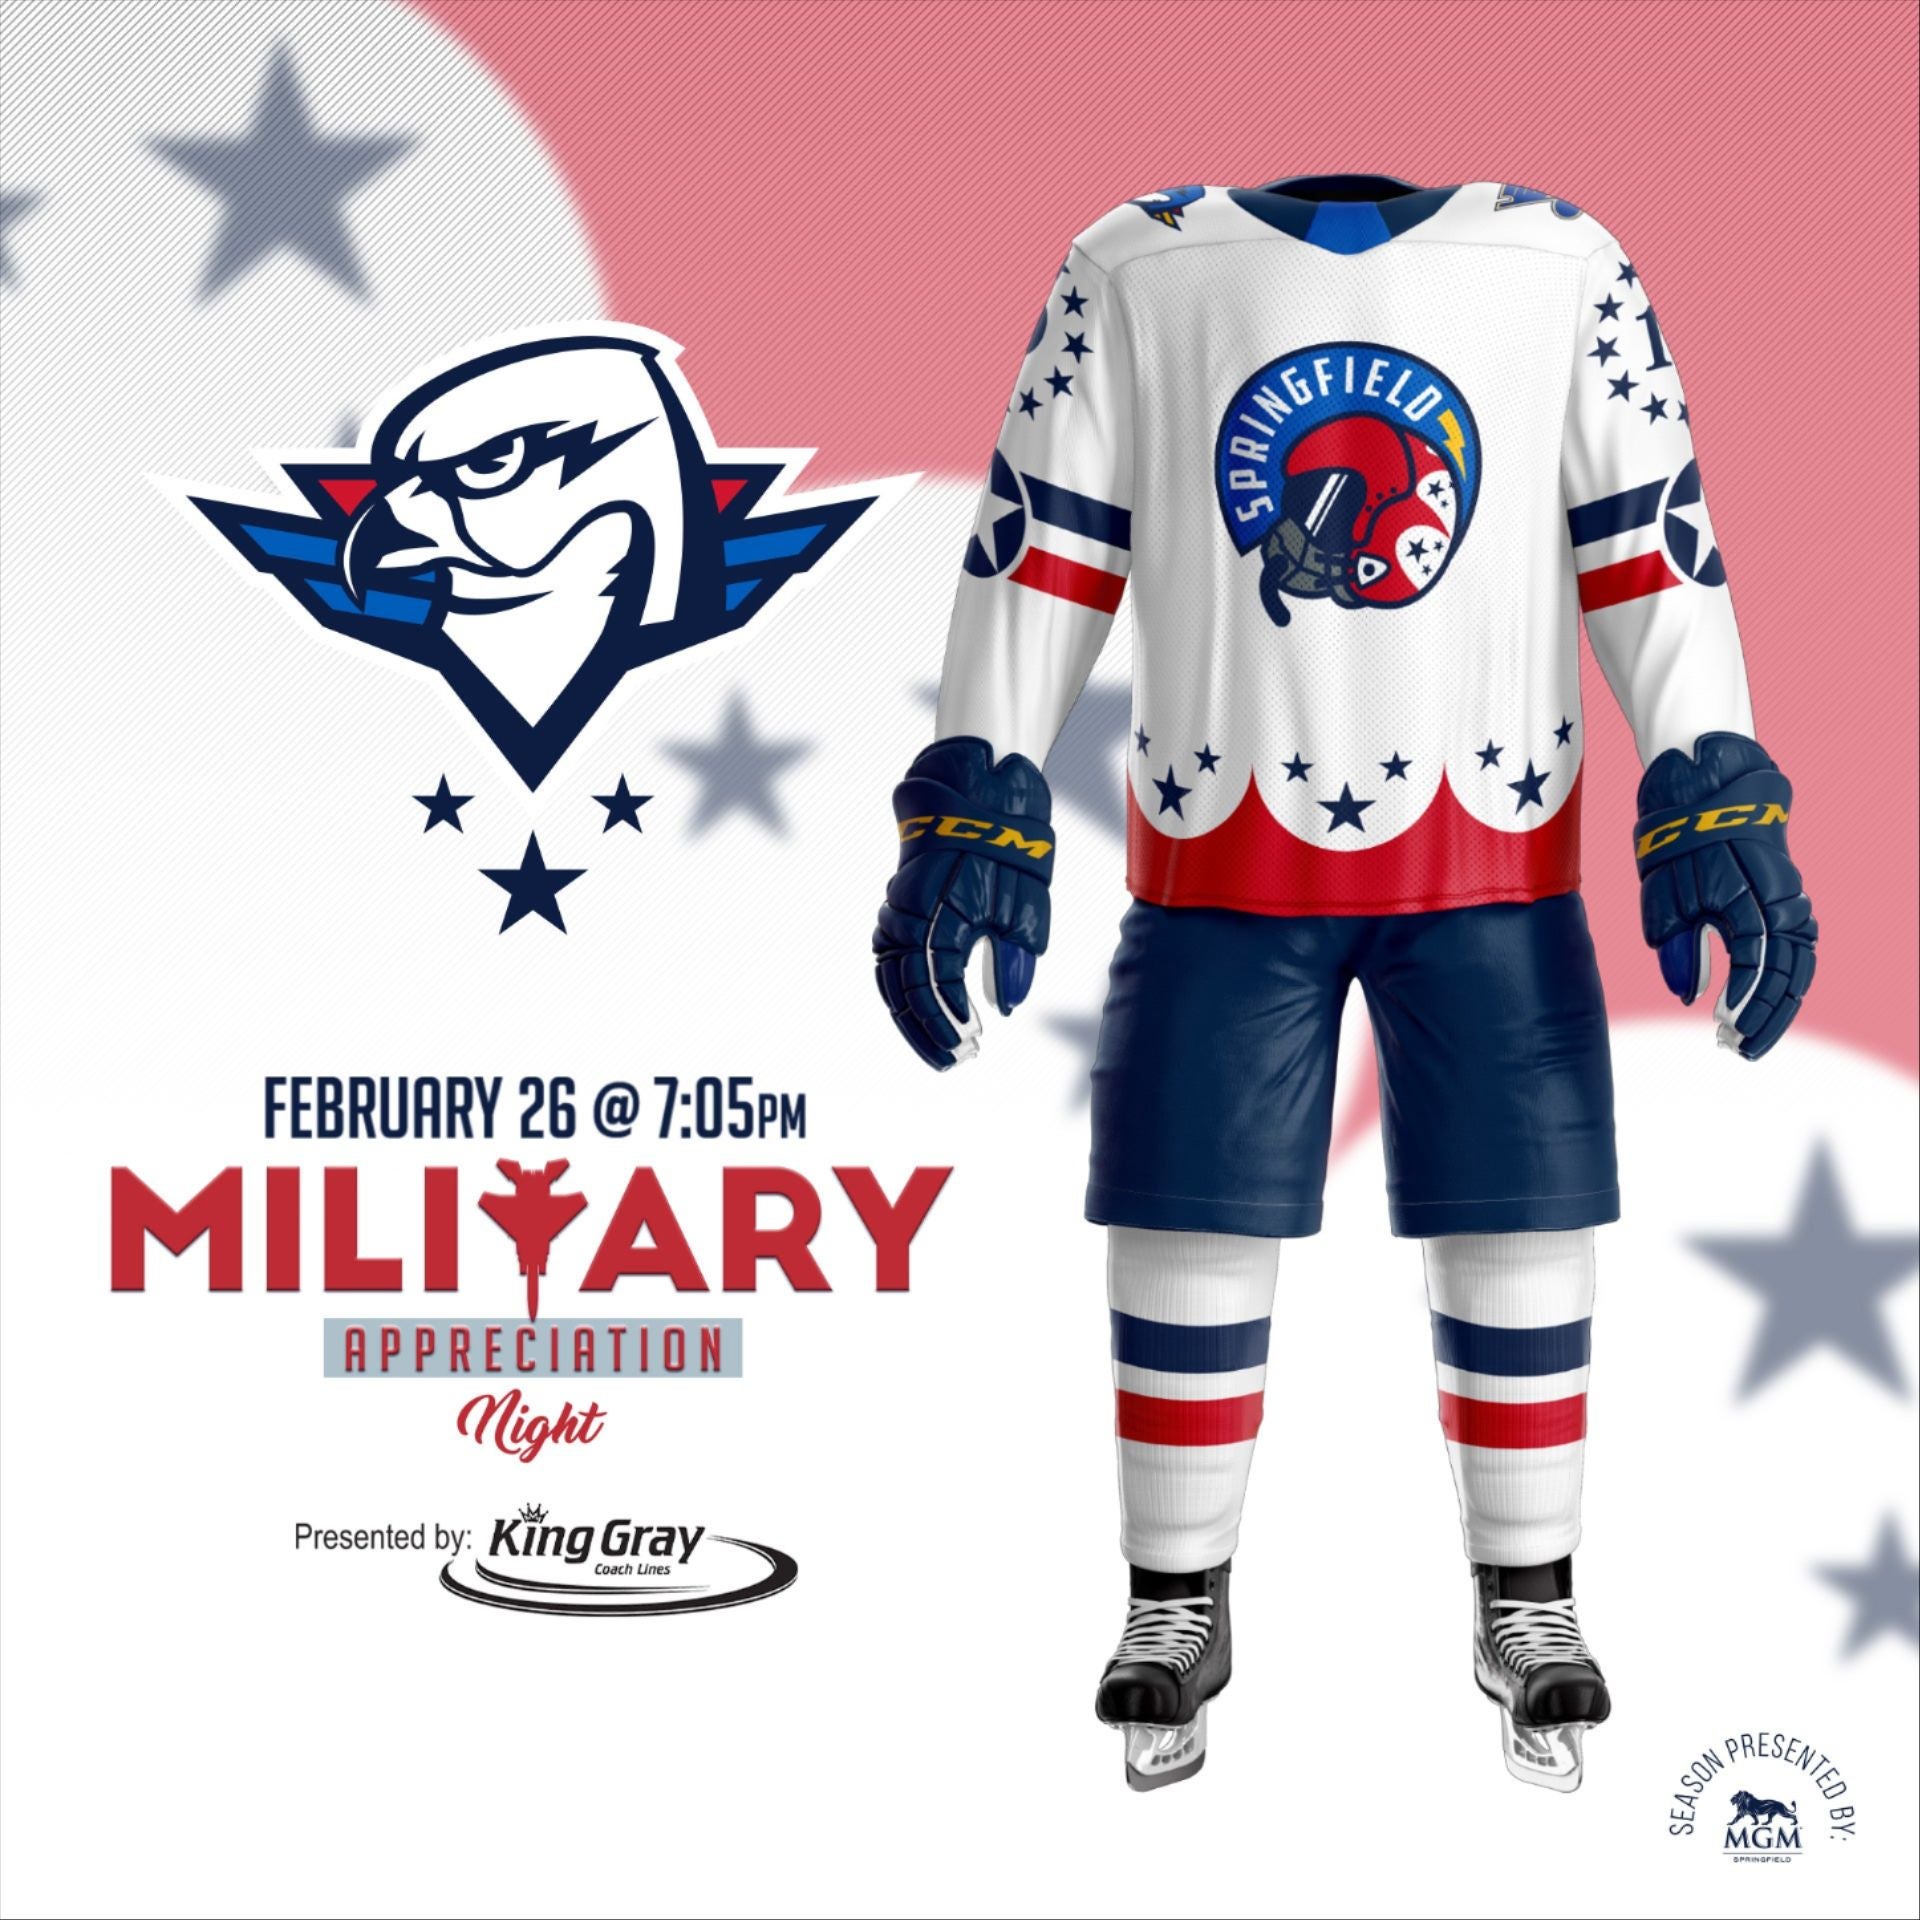 T-BIRDS RAISE $28,575 IN MILITARY JERSEY AUCTION SALES